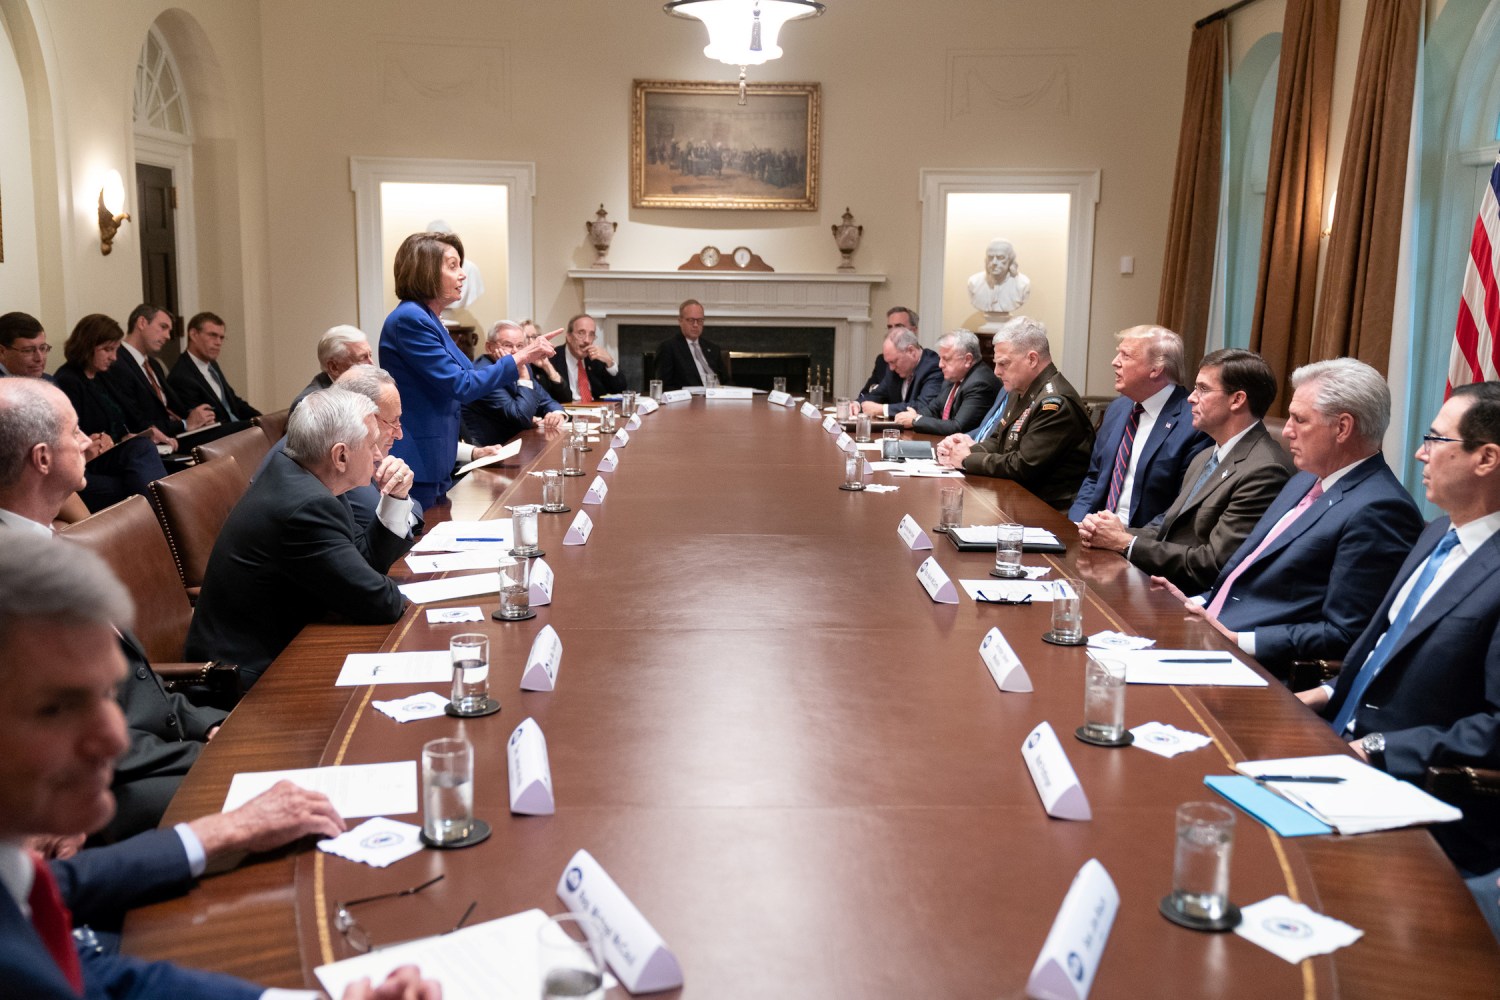 Speaker of the House Nancy Pelosi stands and speaks to U.S. President Donald Trump during an October 16 meeting about Syria between lawmakers, the president and members of the Trump administration in the White House cabinet room in an official White House handout photo released by the White House in Washington, U.S. October 17, 2019. Picture taken October 16, 2019.  Shealah Craighead/The White House/Handout via REUTERS   THIS IMAGE HAS BEEN SUPPLIED BY A THIRD PARTY. - RC175A7B6990